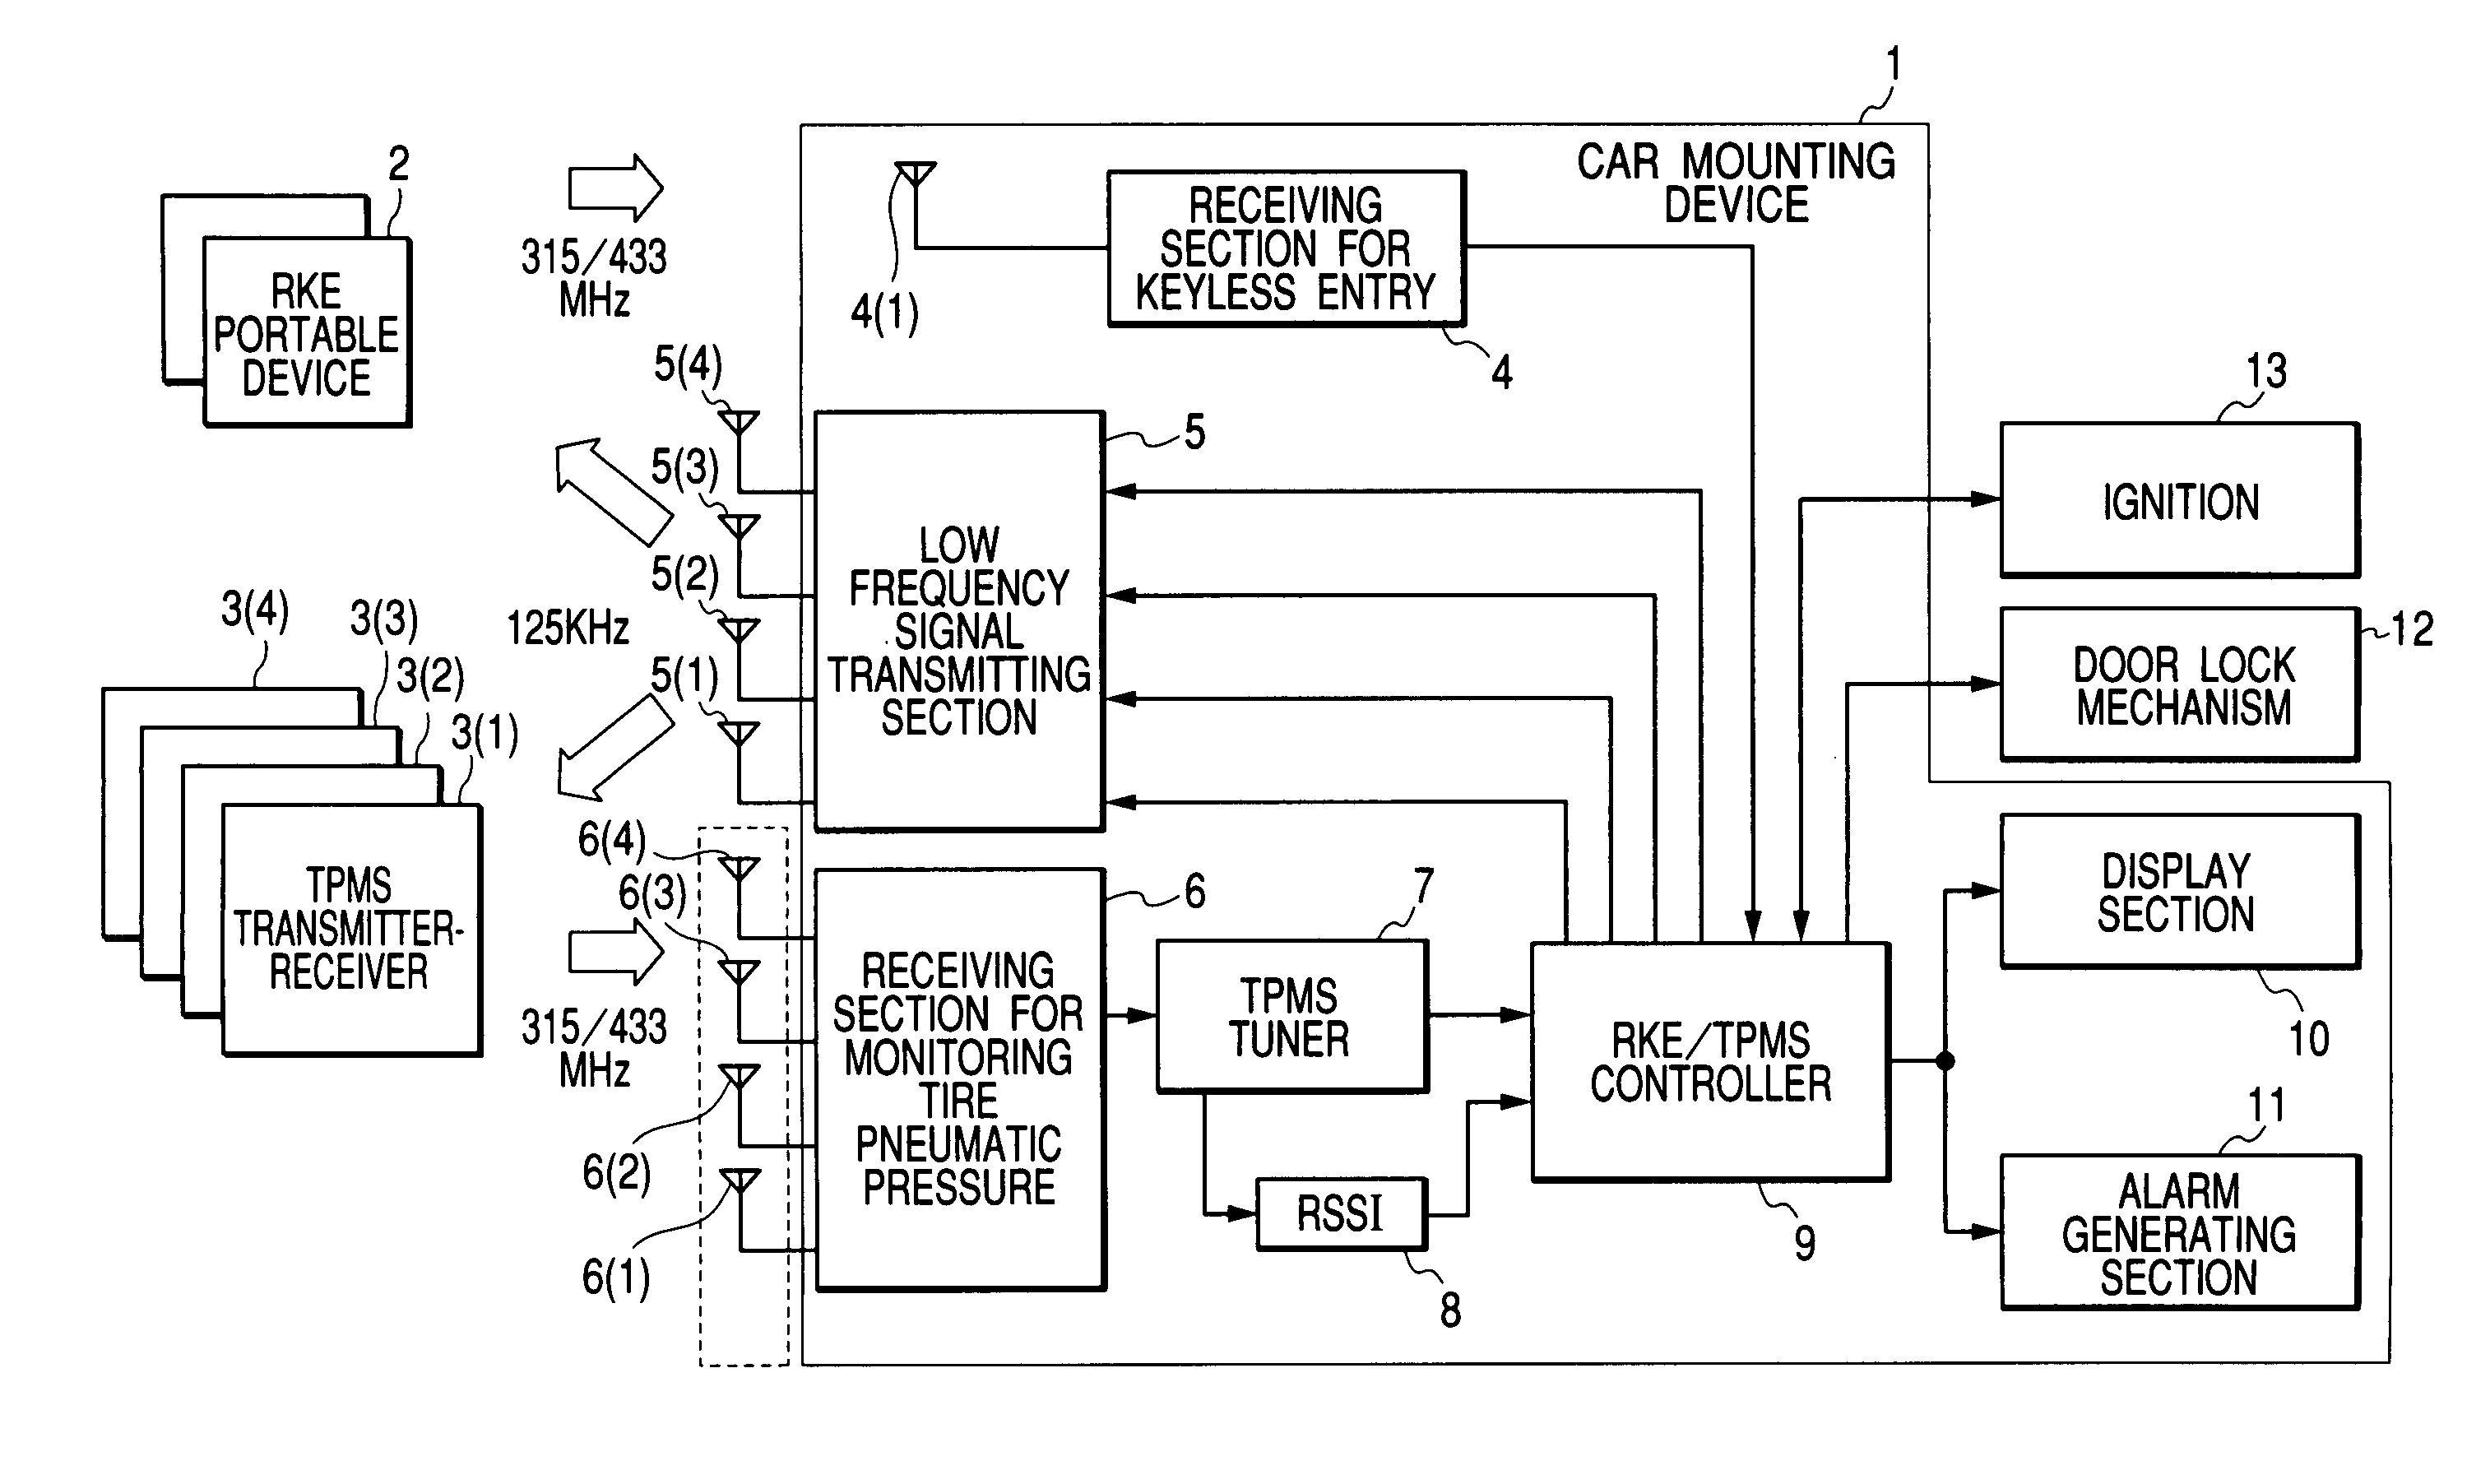 Passive keyless entry device for monitoring tire pneumatic pressure by bidirectional communication